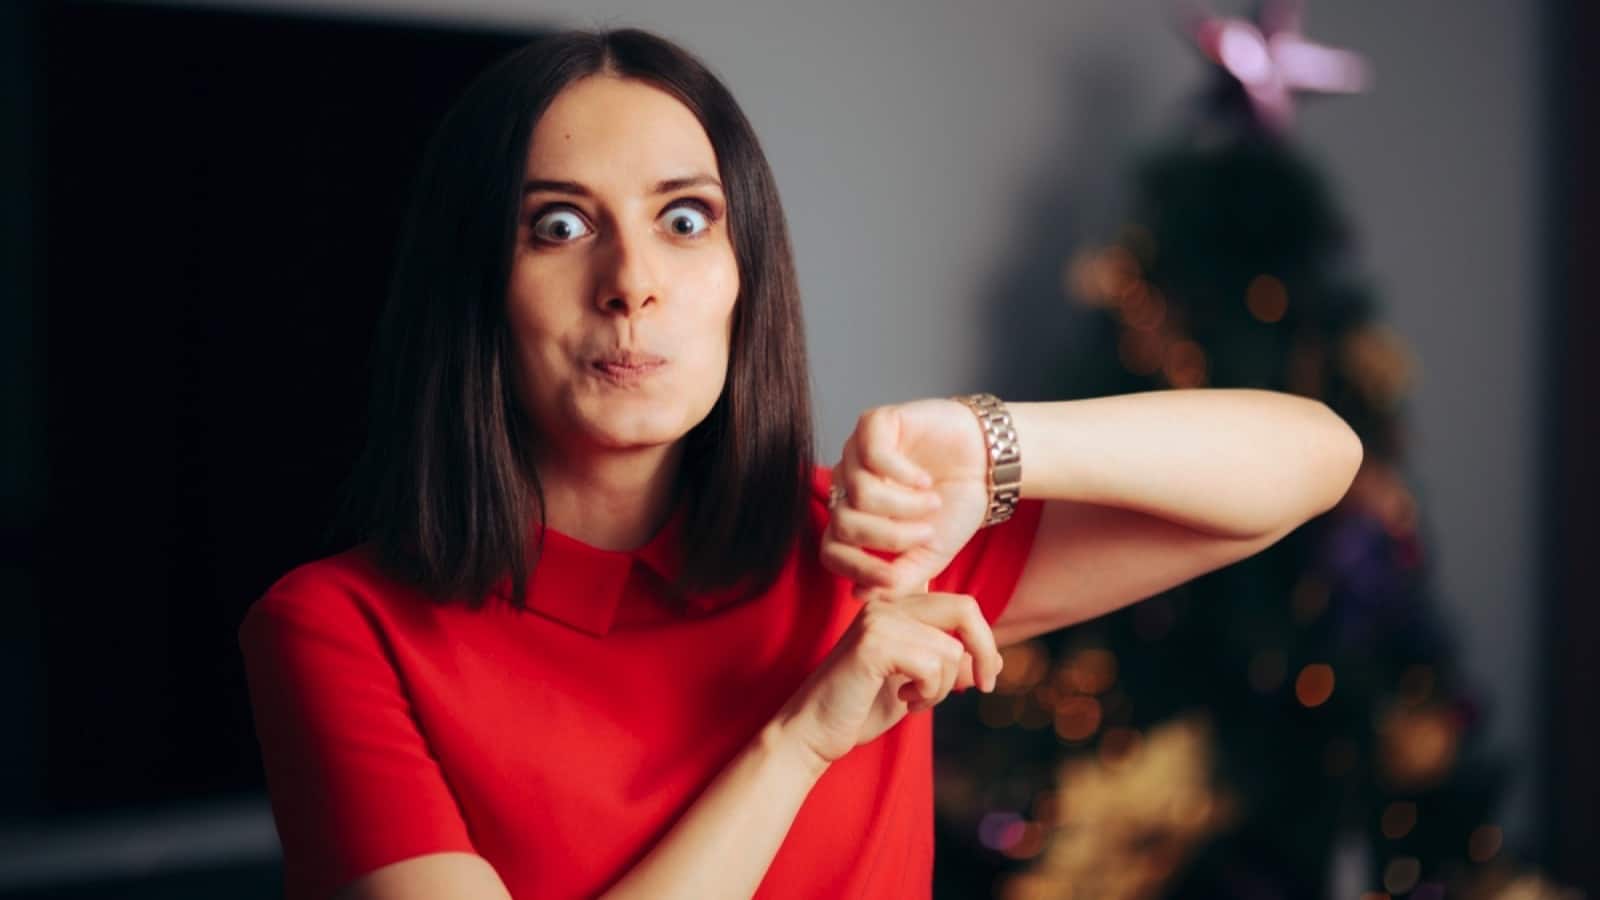 Woman Seeing Watch And Telling It's Late